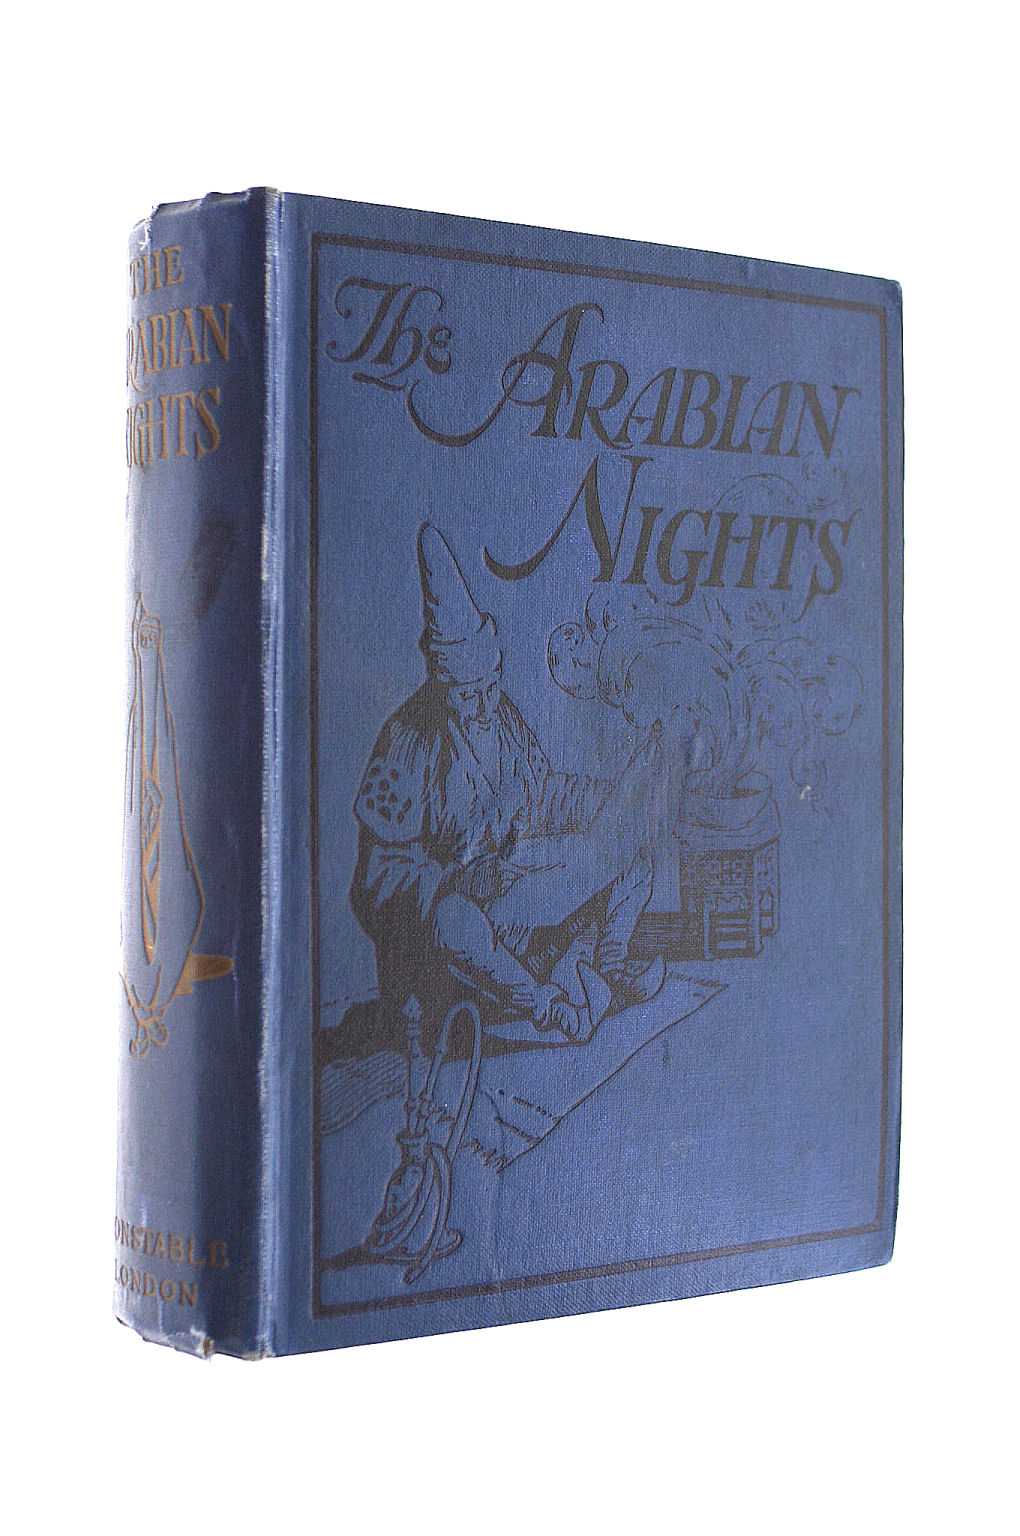 ANON - The Arabian Nights. With about one hundred and thirty illustrations by W. Heath Robinson, Helen Stratton and others